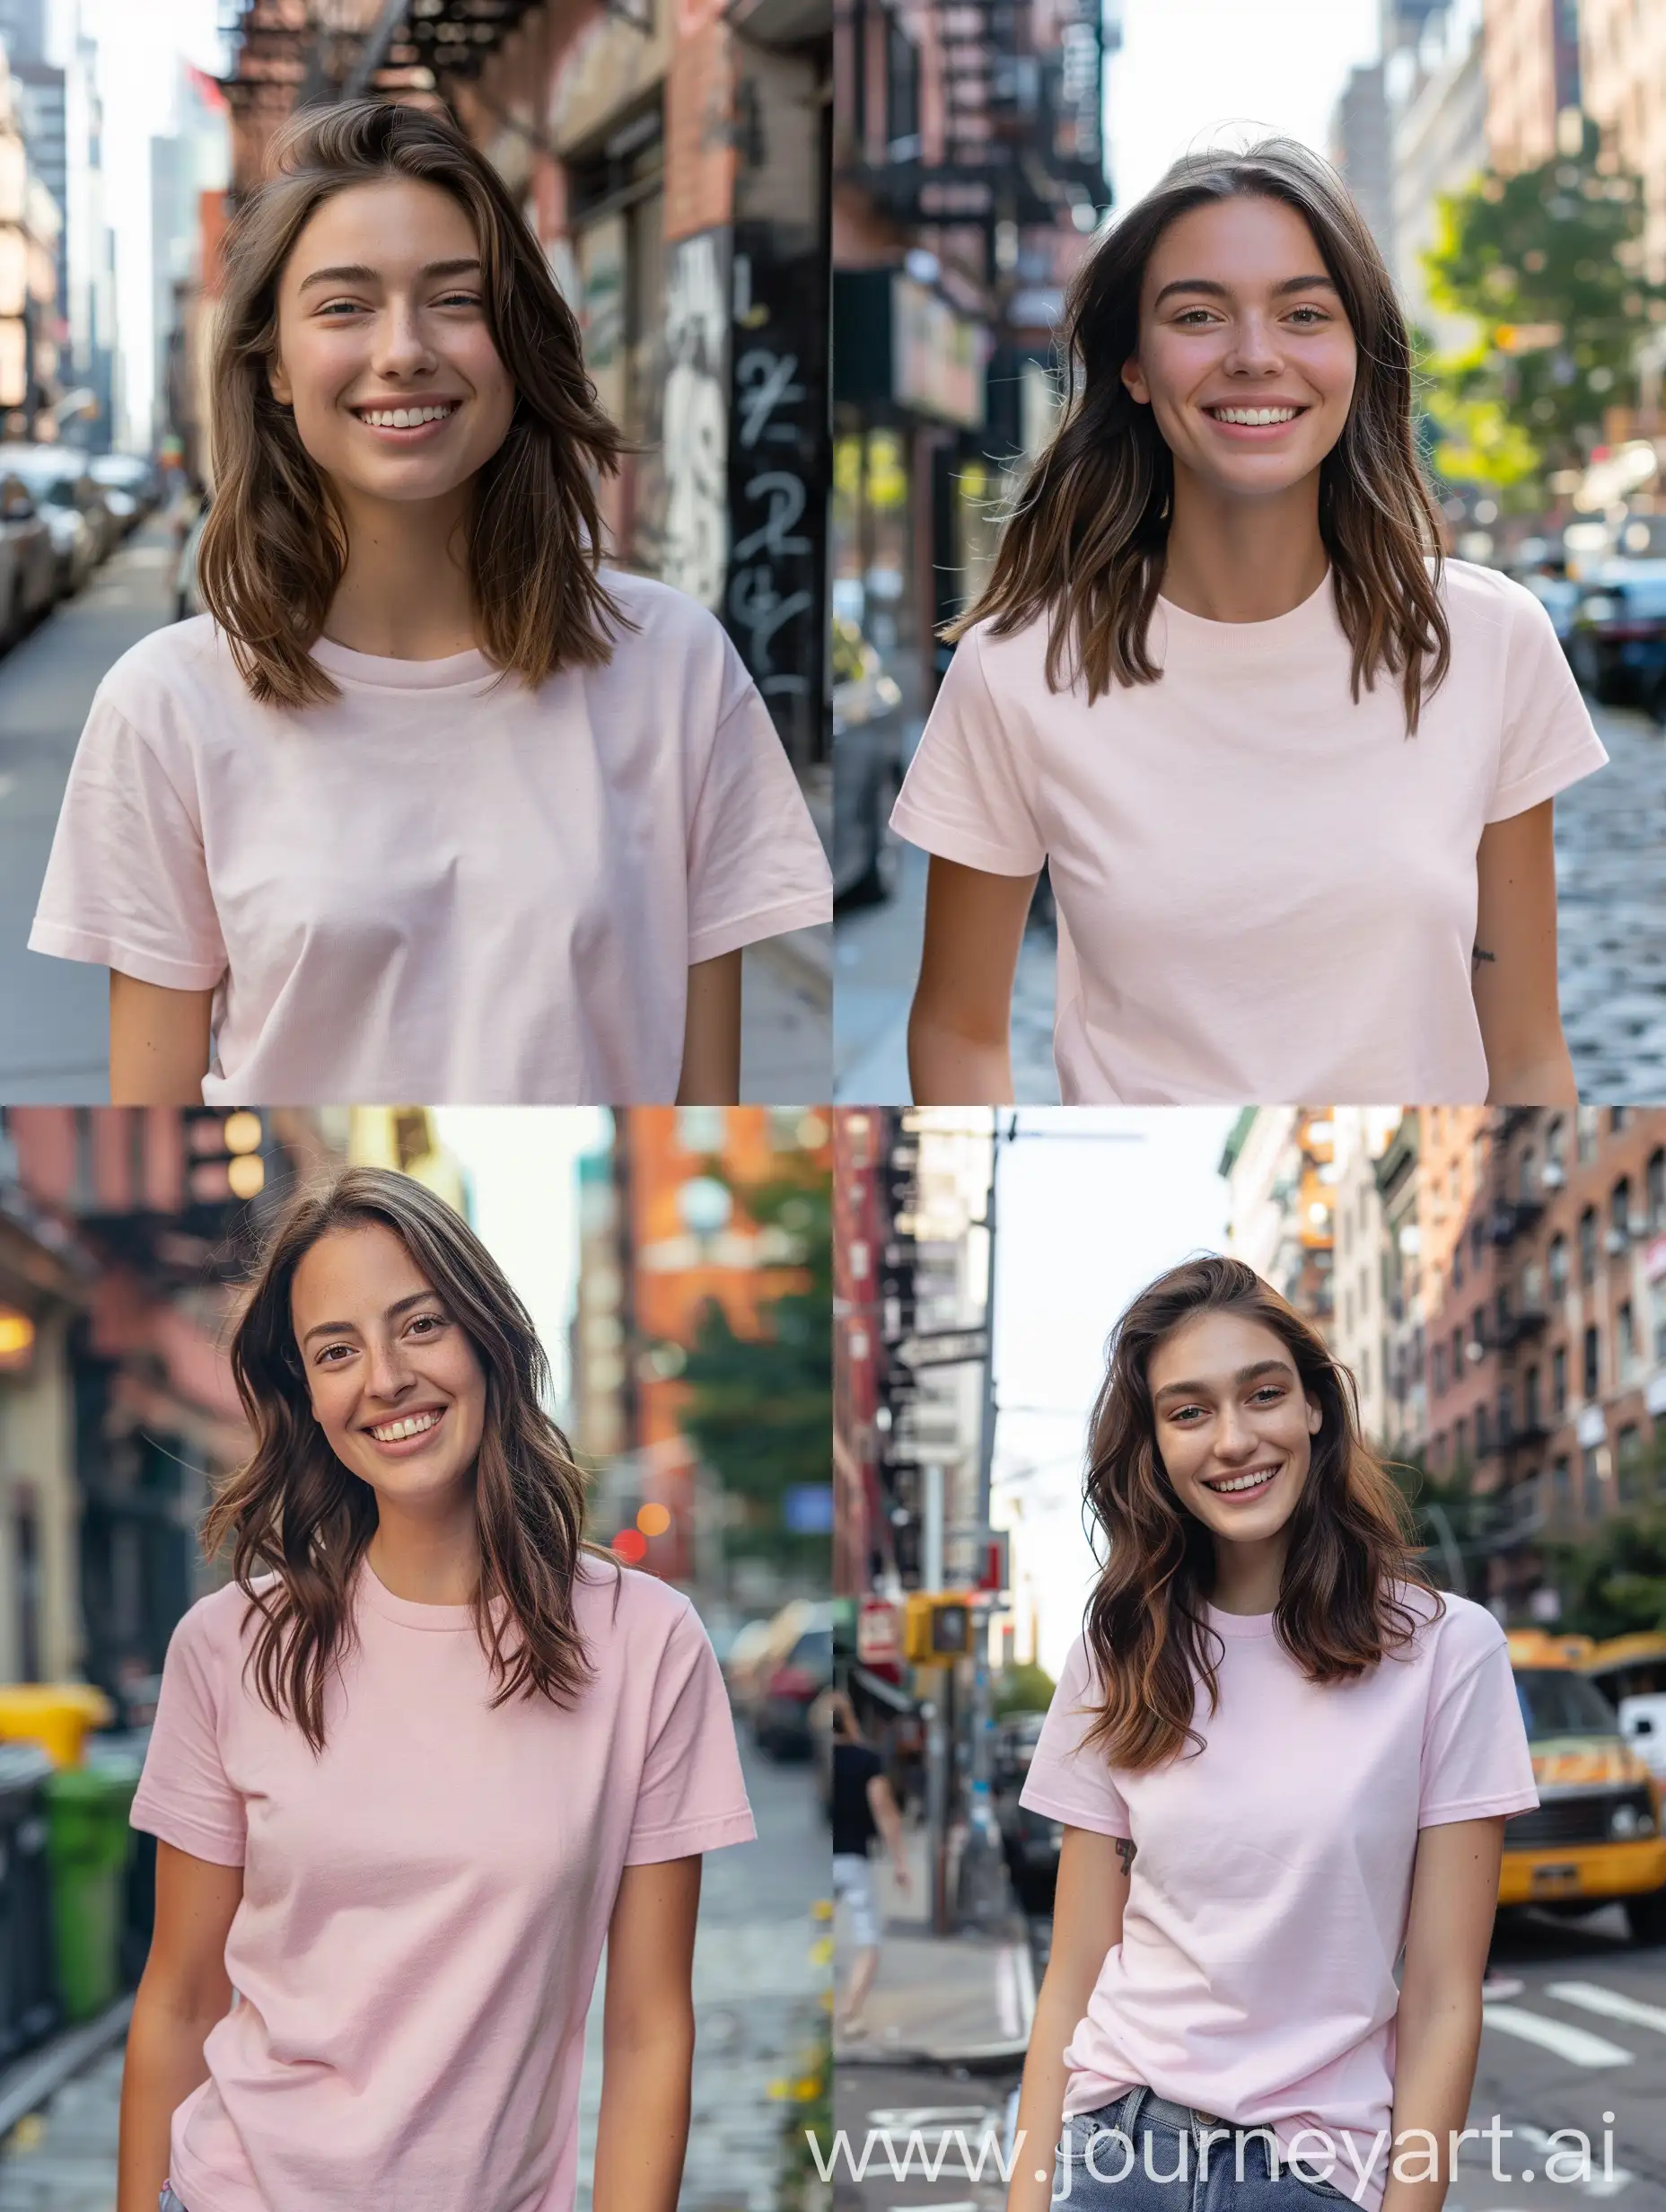 showing head to knee of a 22 year old woman with shoulder length, brown hair, smiling at the camera, wearing a blank light pink snug Gildan 64000 t-shirt with no design, the bowery in new york city as background.